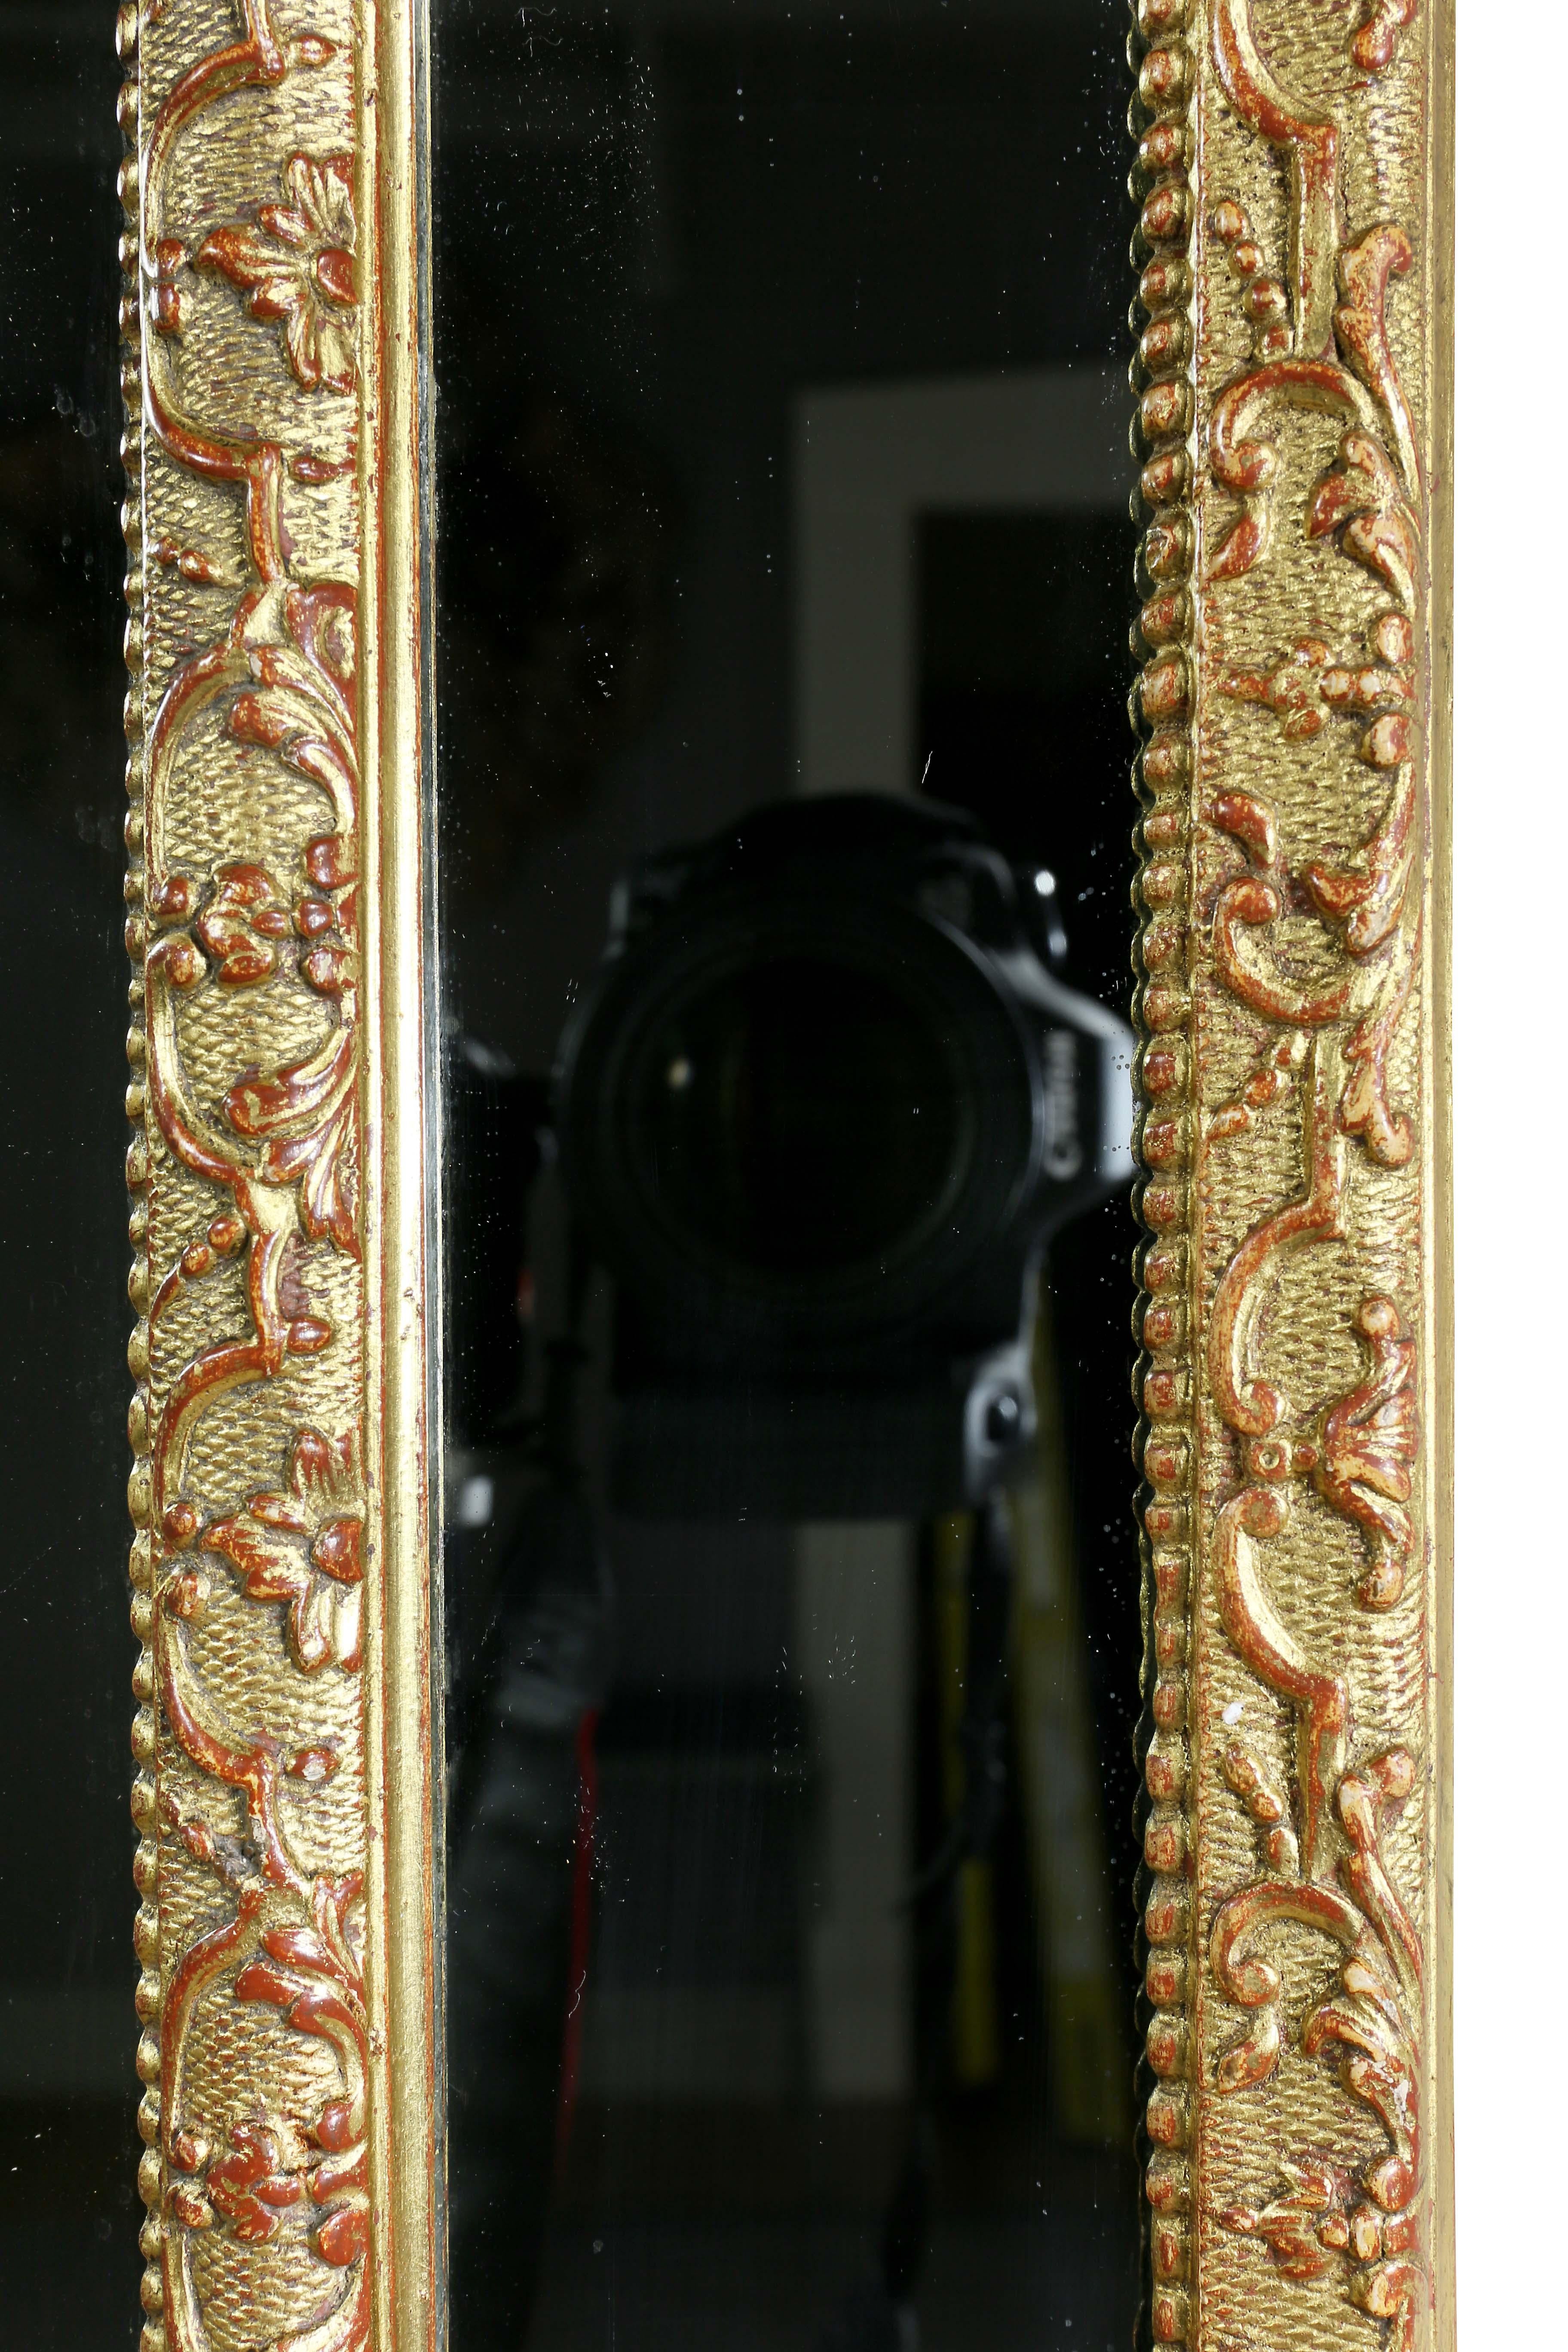 Mirror set within a mirrored border, giltwood inner and outer border.